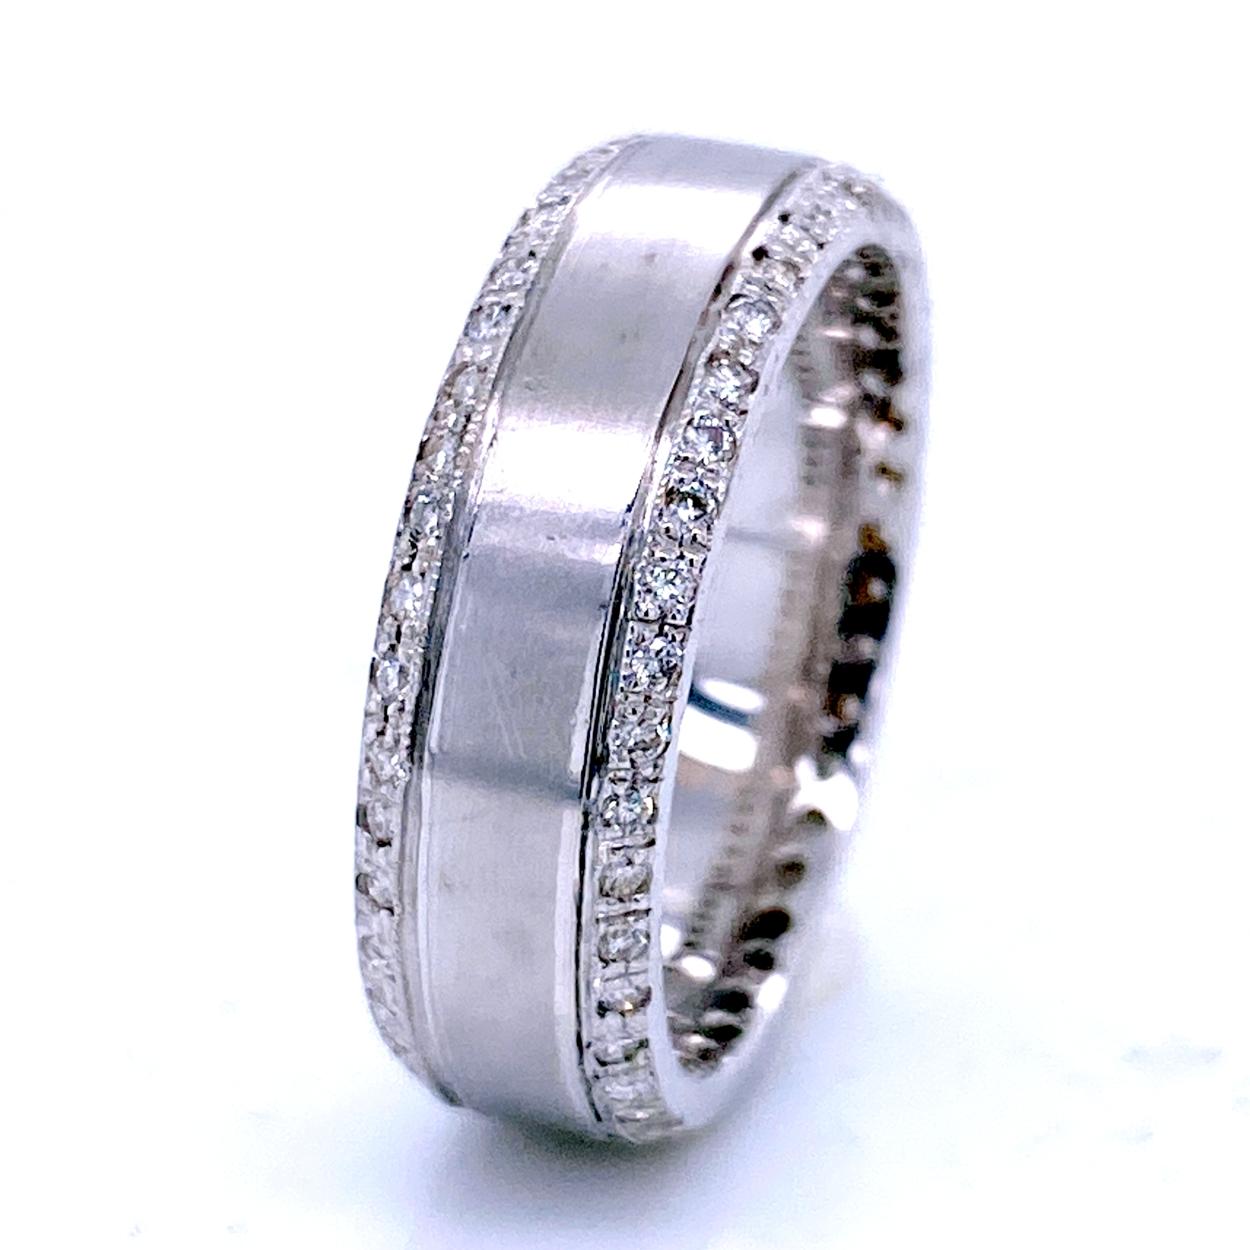 This Beautiful Gent's ring is made in 18K white gold with mat finish middle. It has 74 pieces of perfectly matched 1 mm Round Brilliant Diamonds(Total Weight 0.62 Ct) Pave set on the sides. 
Total Diamond Weight: 0.62 Ct VS2-SI1/G-H
Total Weight of